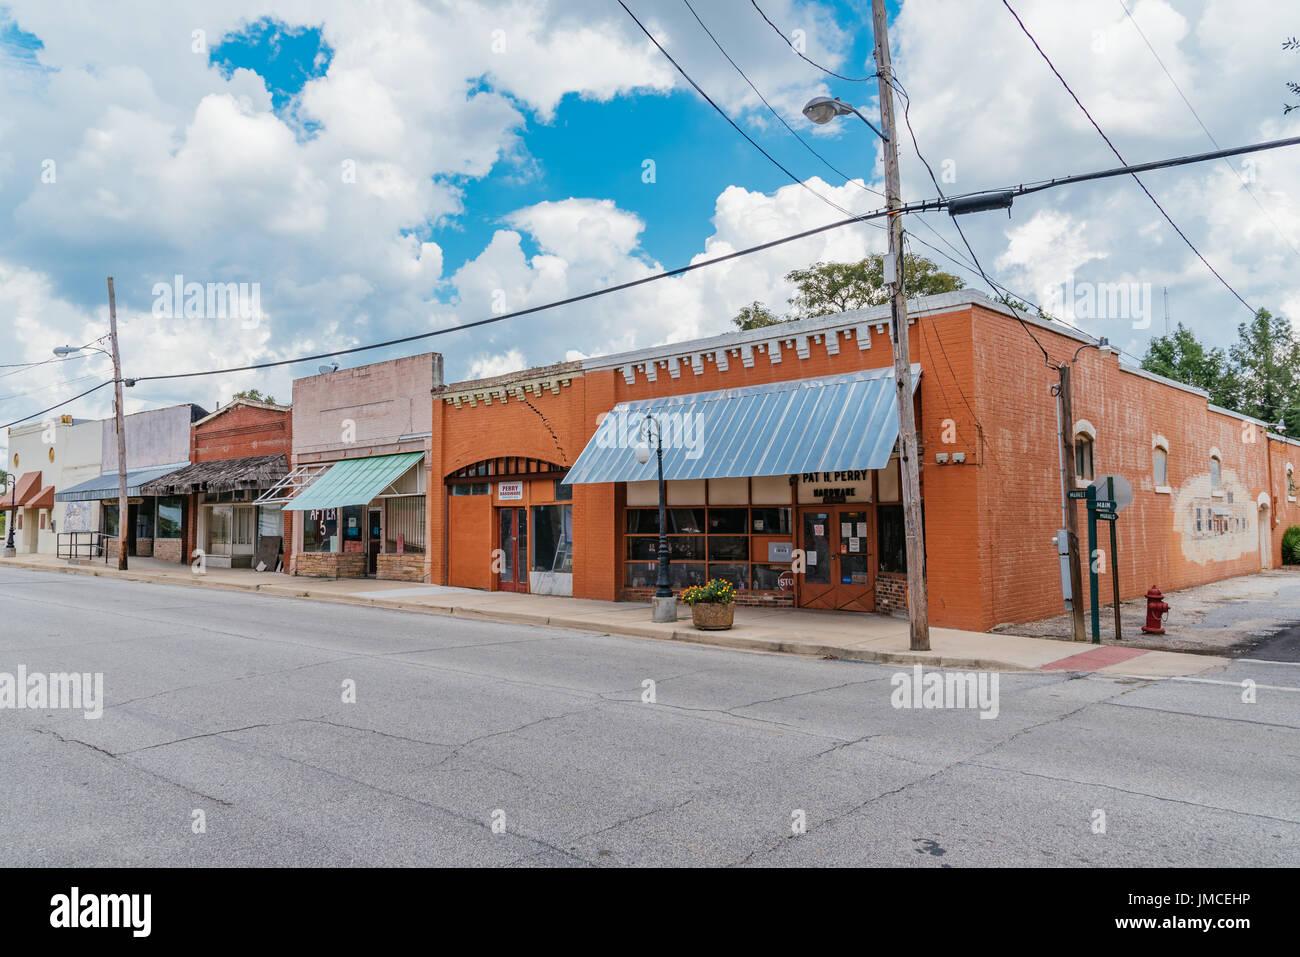 Typical small town store fronts in southern USA, Hurtsboro, Alabama, Main Street. Stock Photo